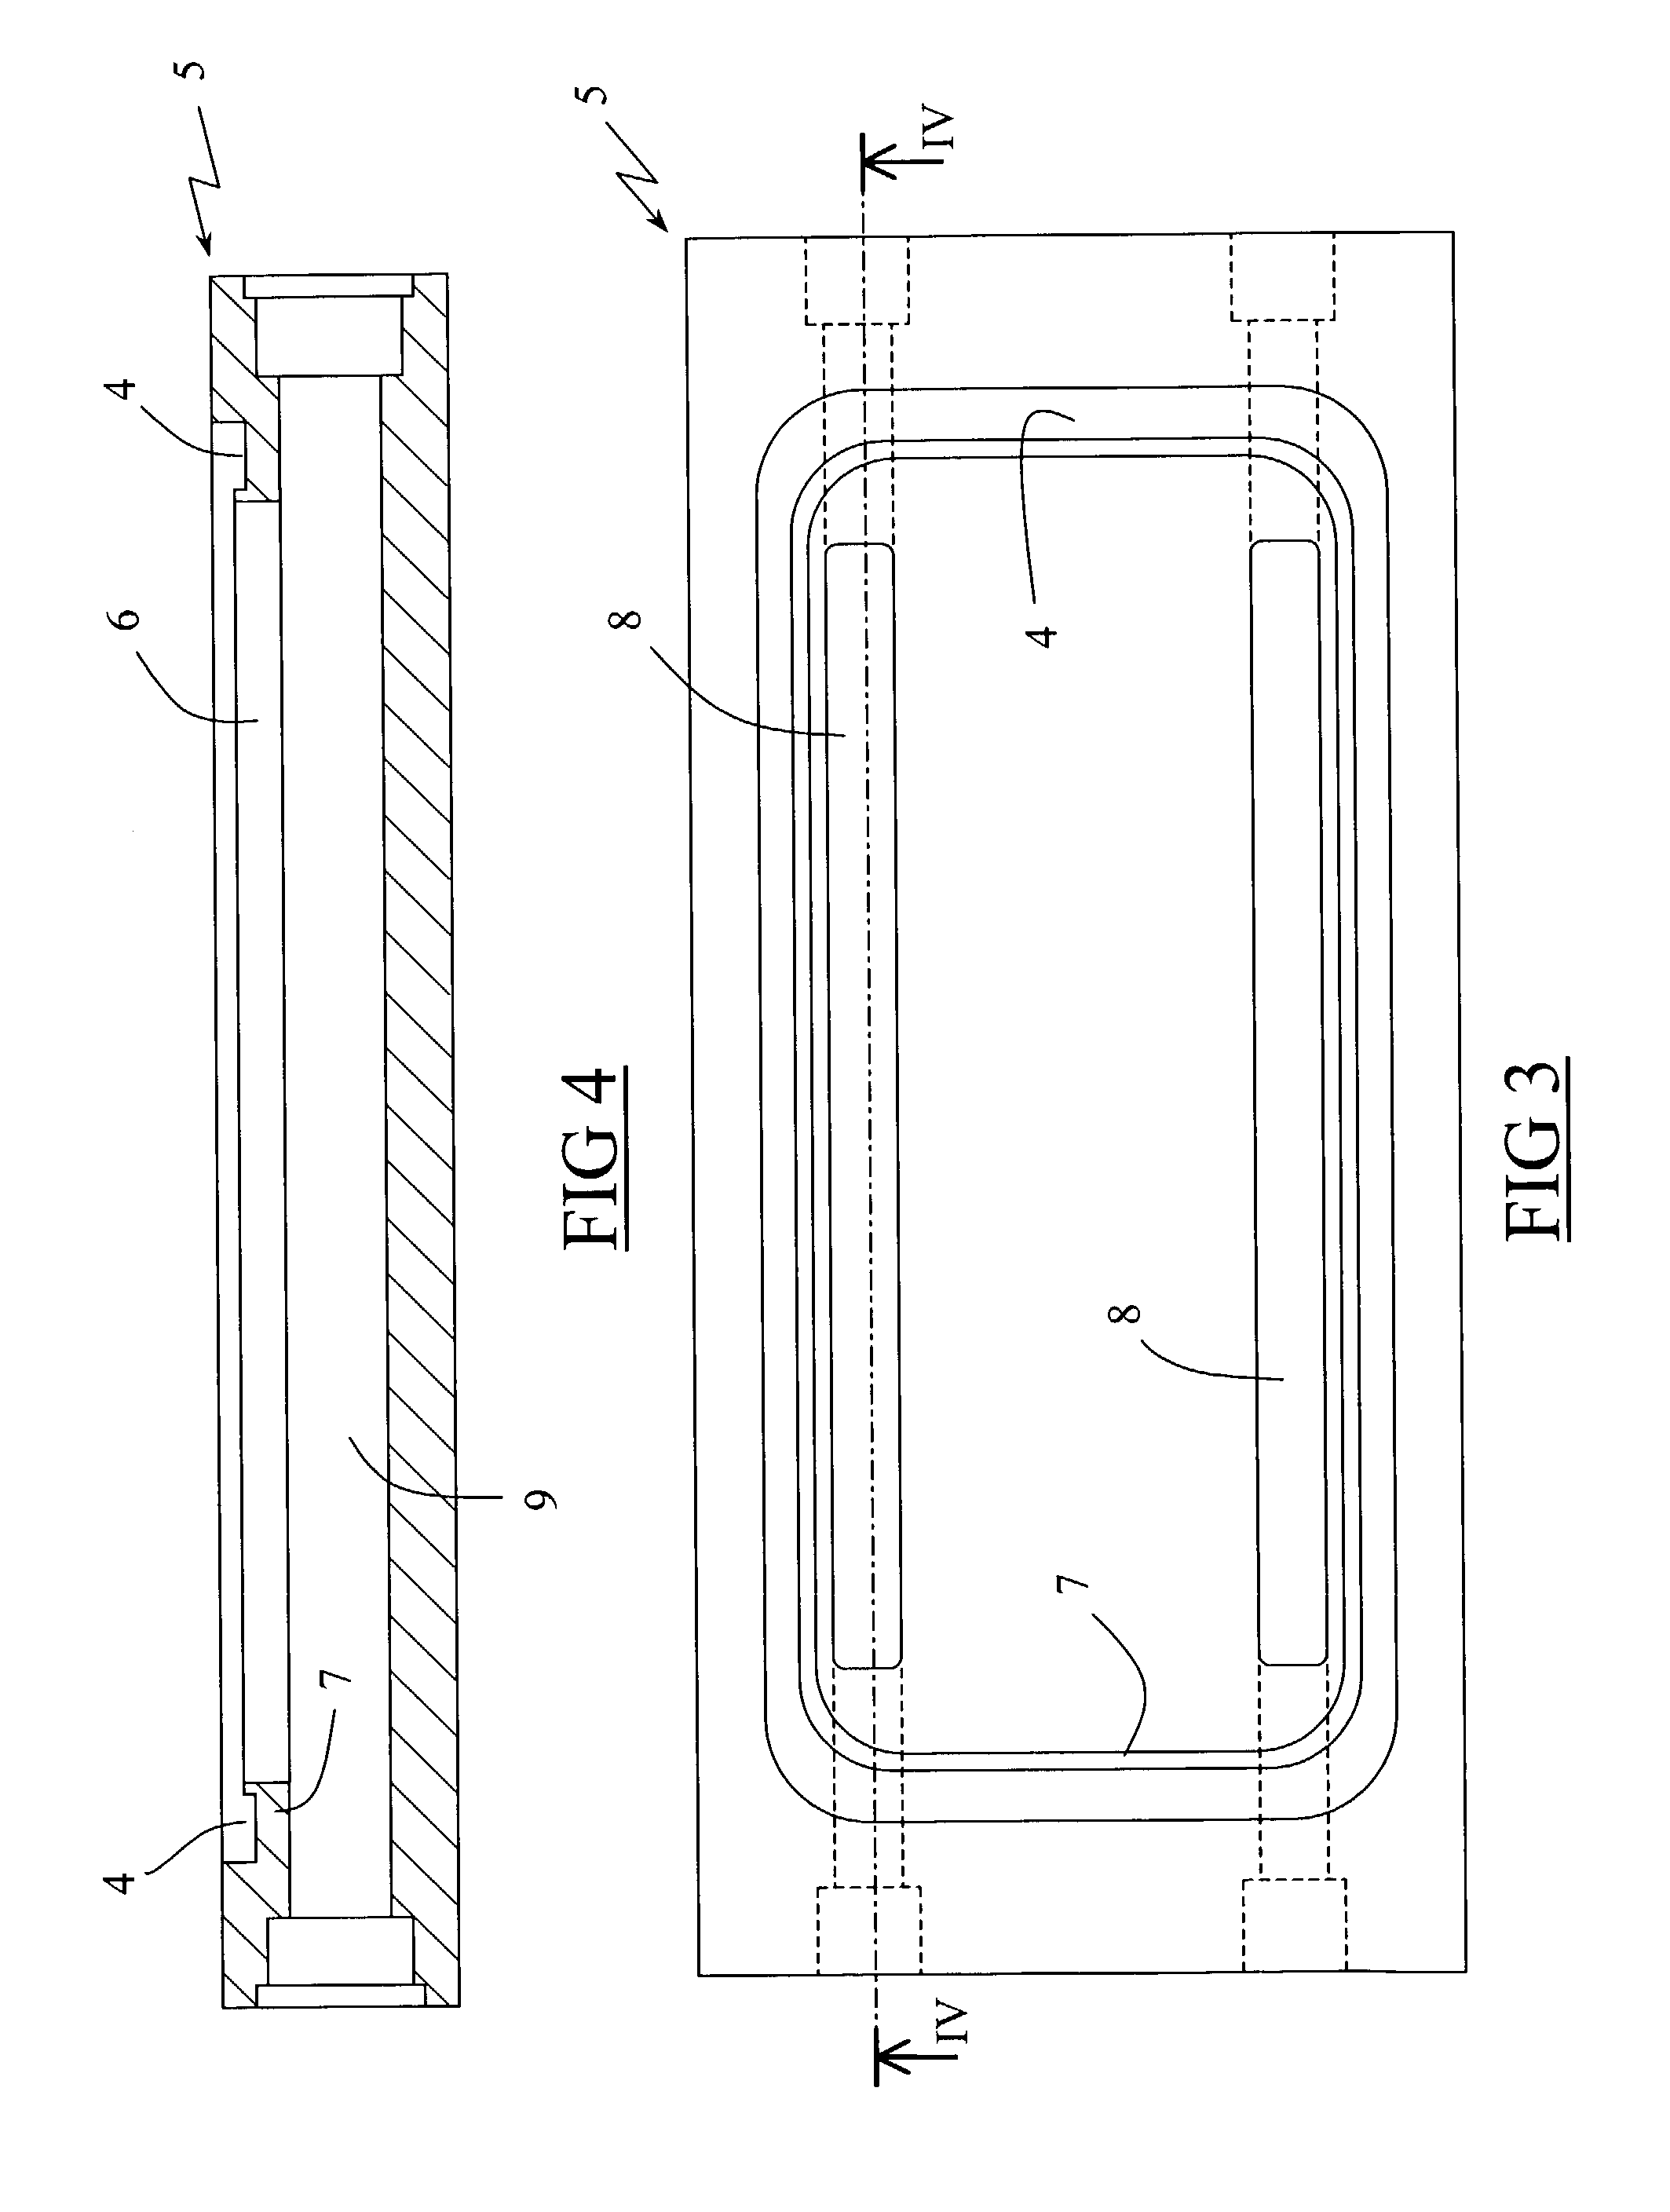 Method of improving the properties of adhesion of a non-oxide ceramic substrate before gluing it